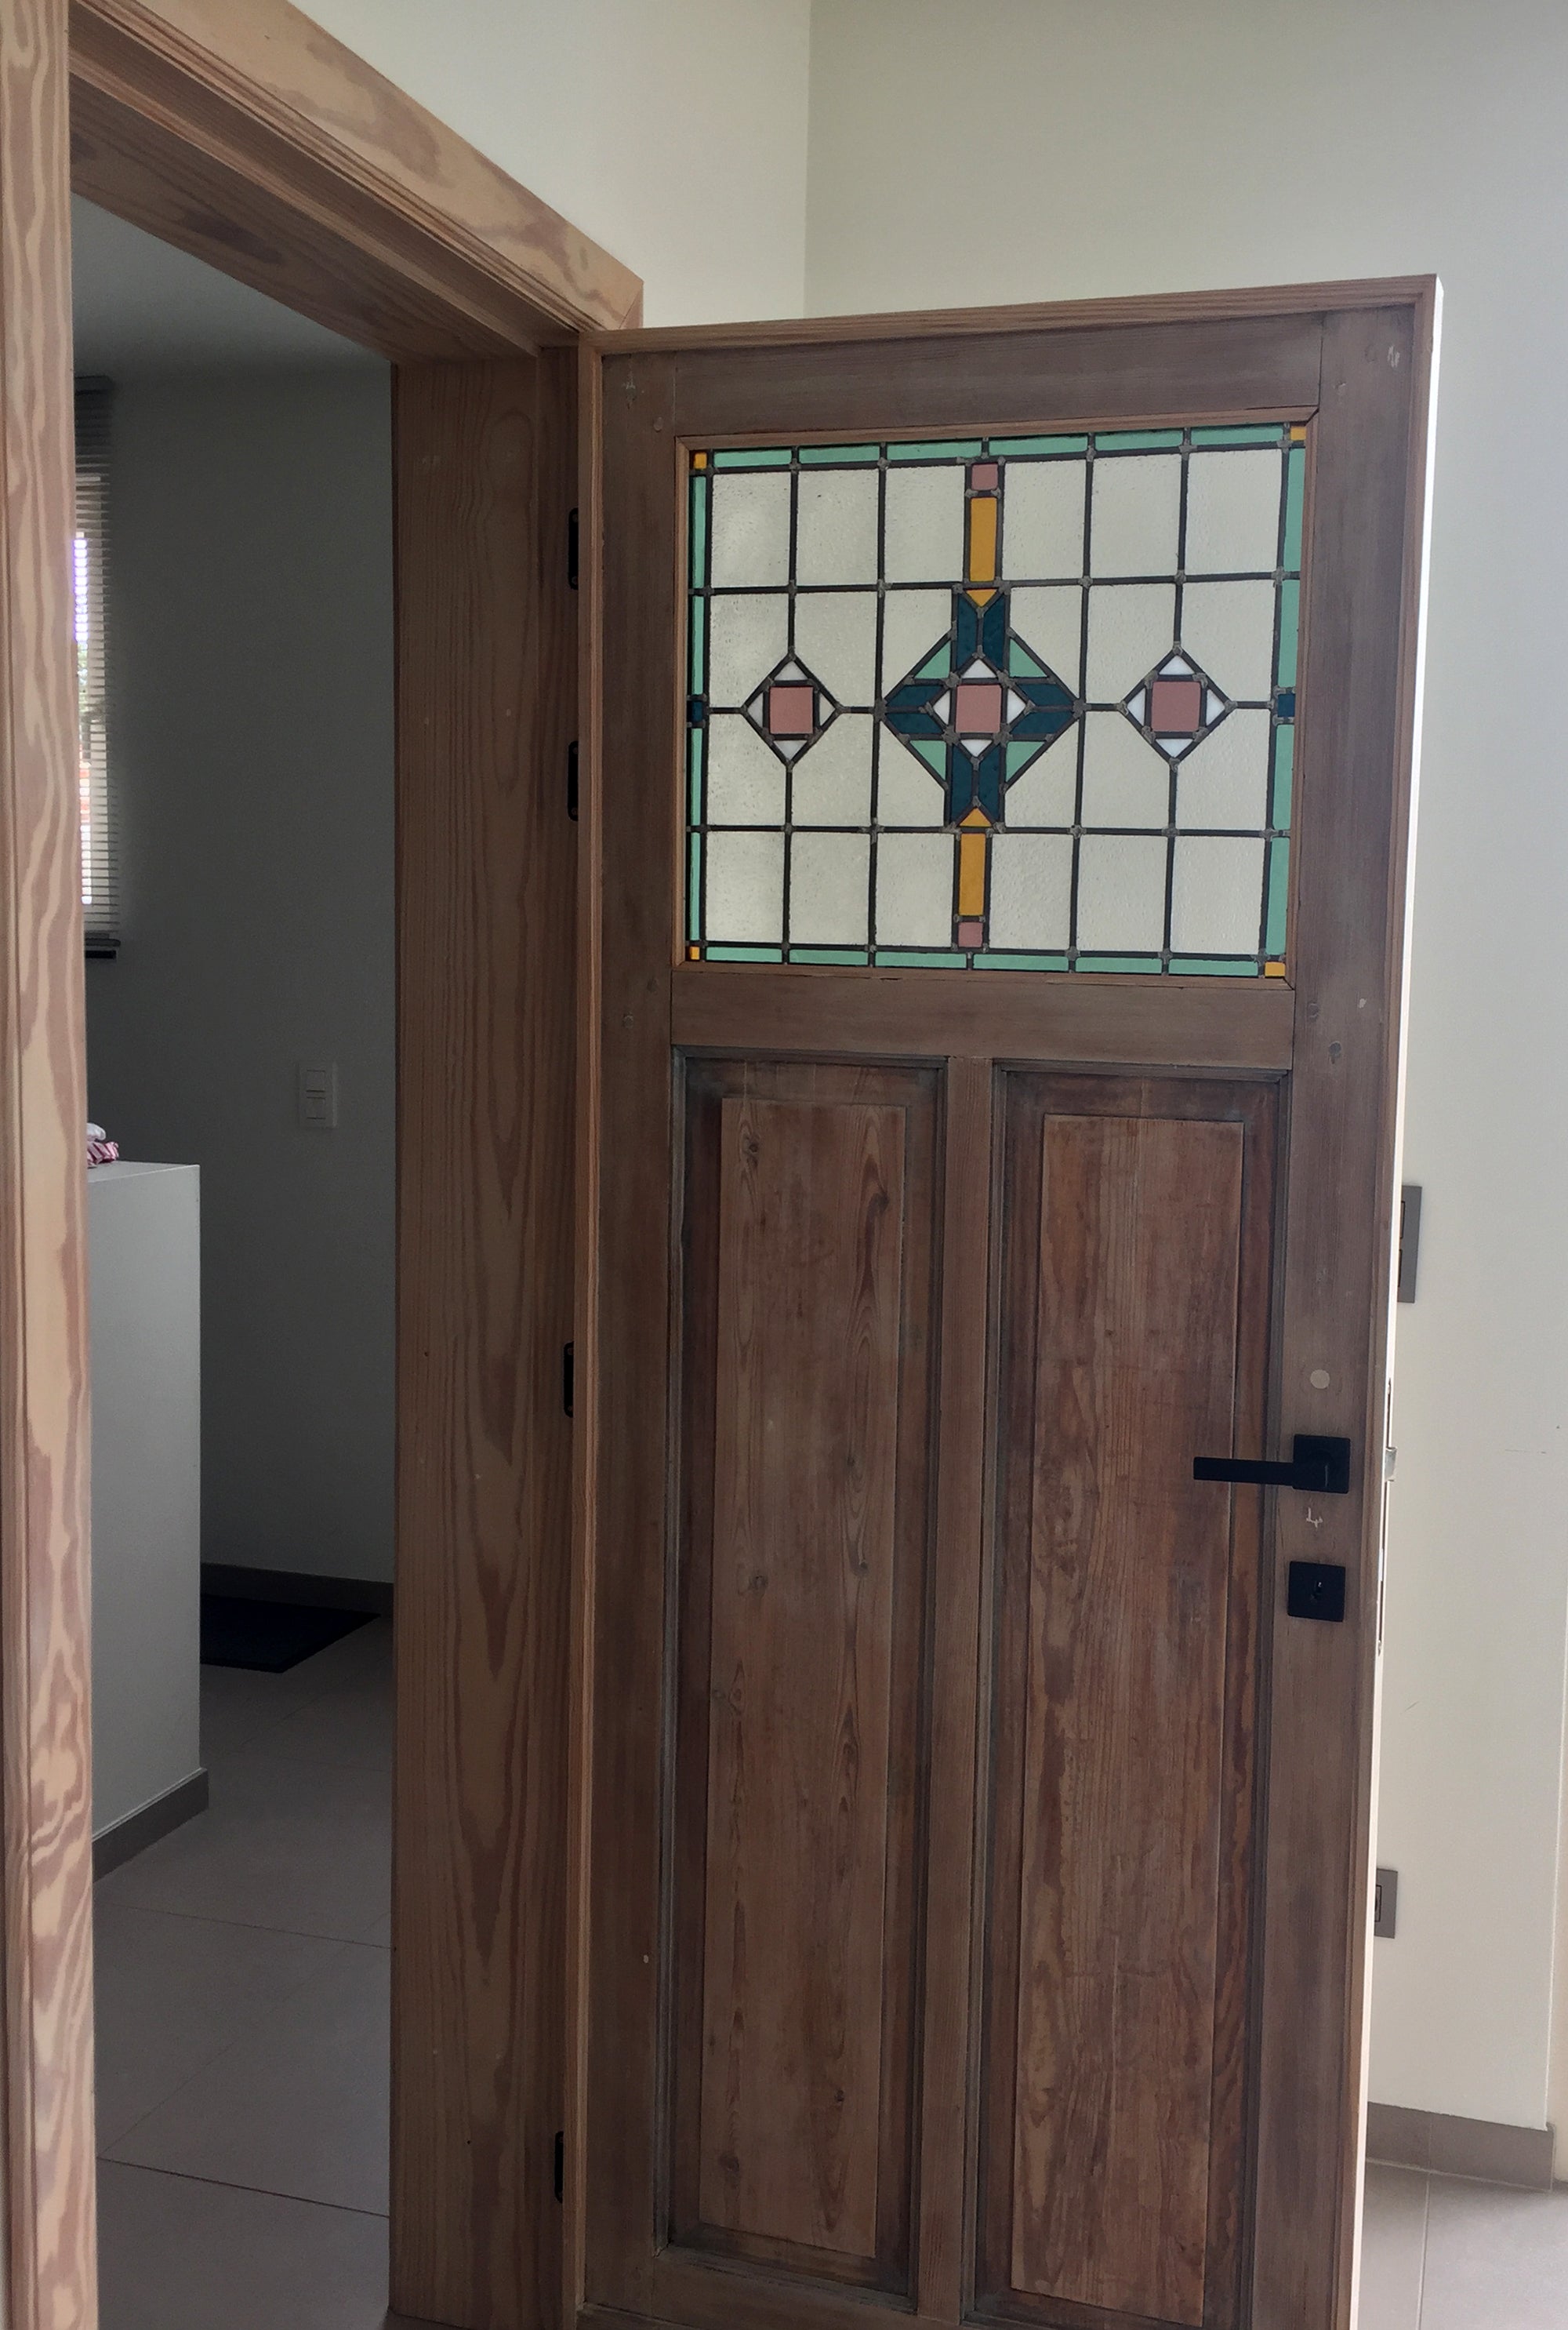 Art Deco Glass Windows In Wooden Doors Price On Request Glass Glass